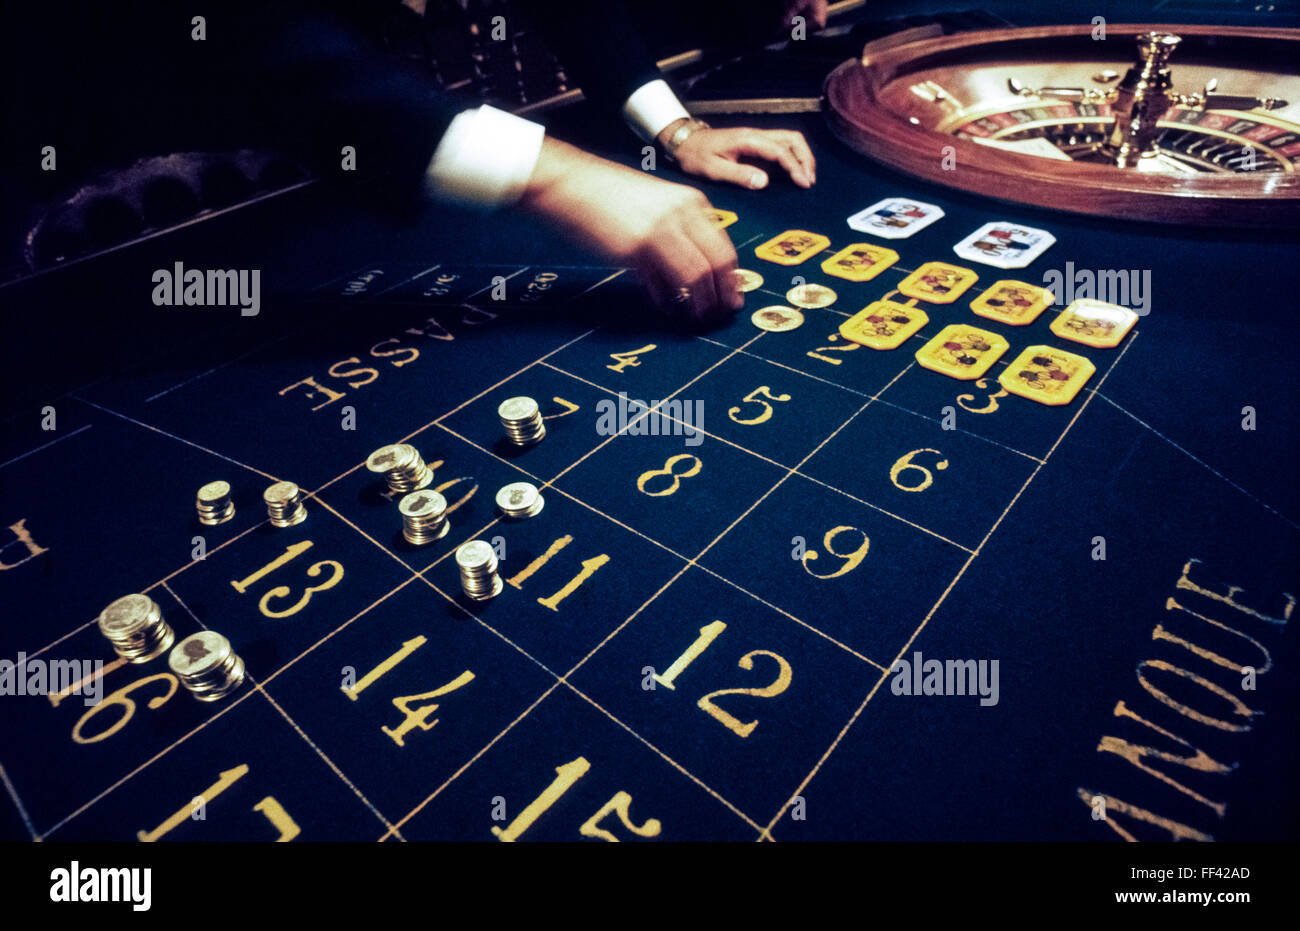 Real silver and gold metal chips have been used for high-stakes betting at the roulette tables during the two-century-old history of Casino Baden-Baden in the Kurhaus in the Black Forest (Schwarzwald) of Germany. Nowadays the chips are only brought out for play on special occasions, along with large rectangular gaming plaques of greater values. The Baden-Baden casino is one of the world's most luxurious gaming palaces and a major attraction in that famed European spa town. Stock Photo